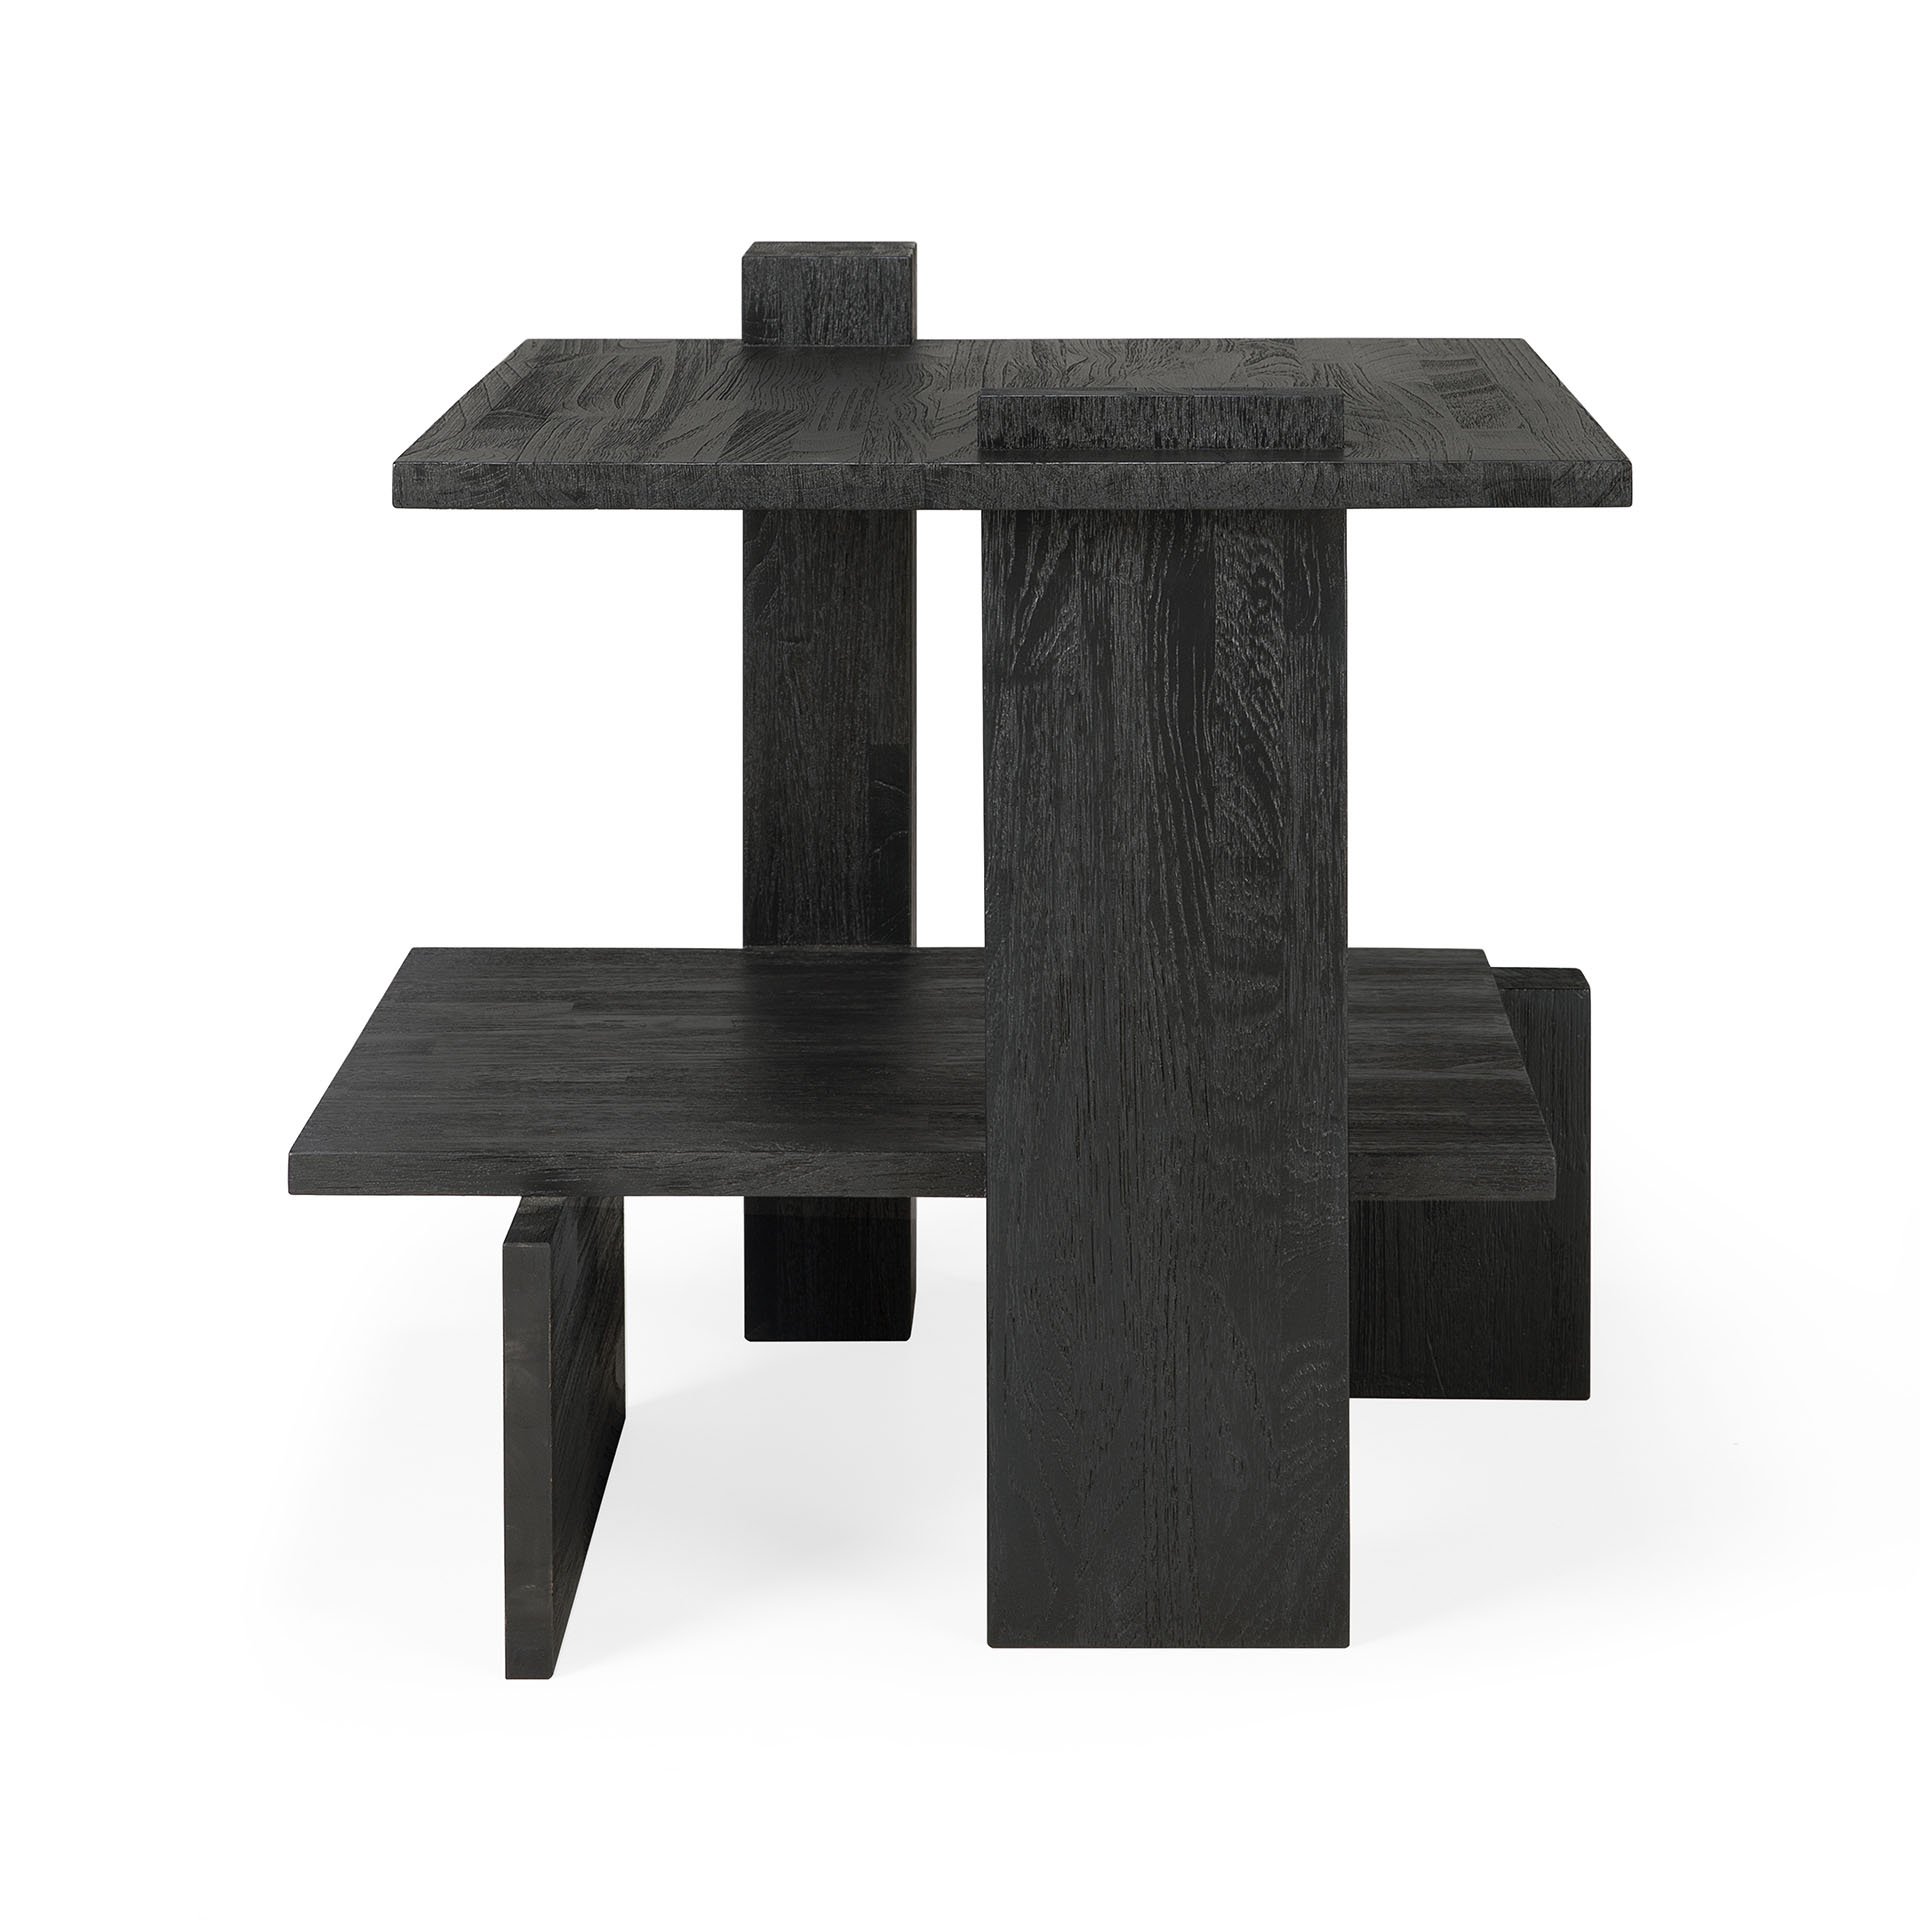 Abstract black side table